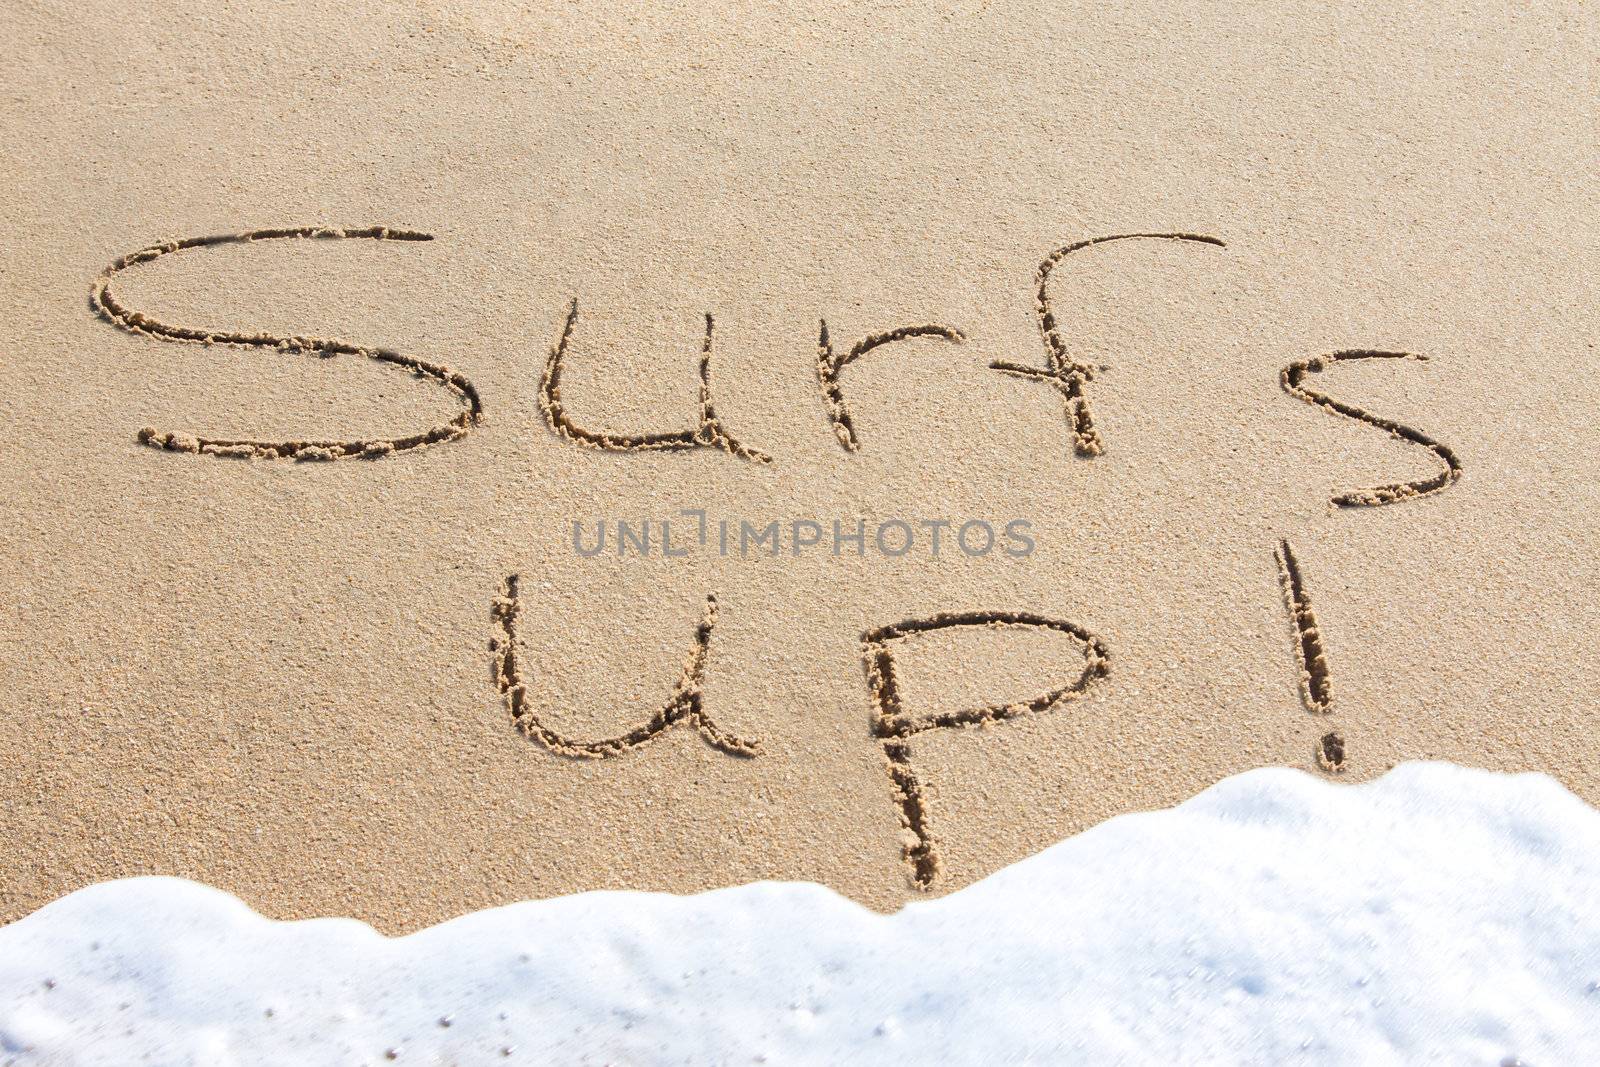 Surf's up - written in the sand with a foamy wave underneath